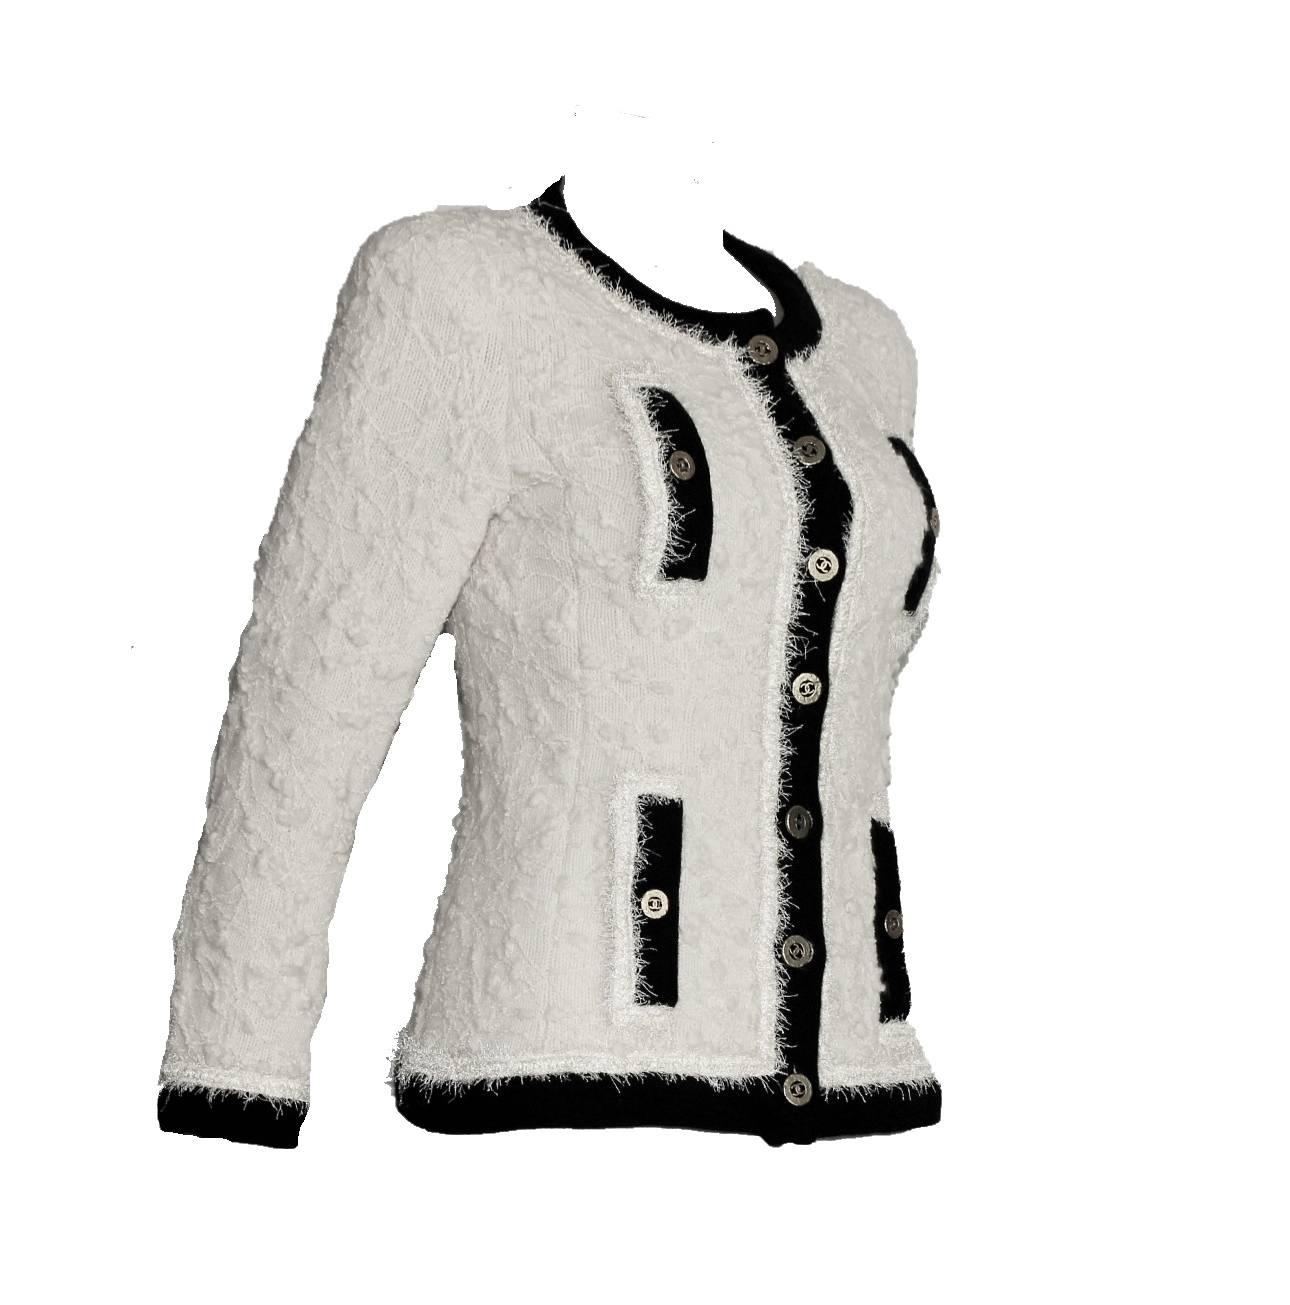 An extremely rare and collecable Chanel Boucle Jacket from the famous FW 1994 collection.
Designed by Karl Lagerfeld for Chanel and already today a collector's item.
Ivory boucle with black trimming
Golden Chanel CC signature buttons
Fully lined